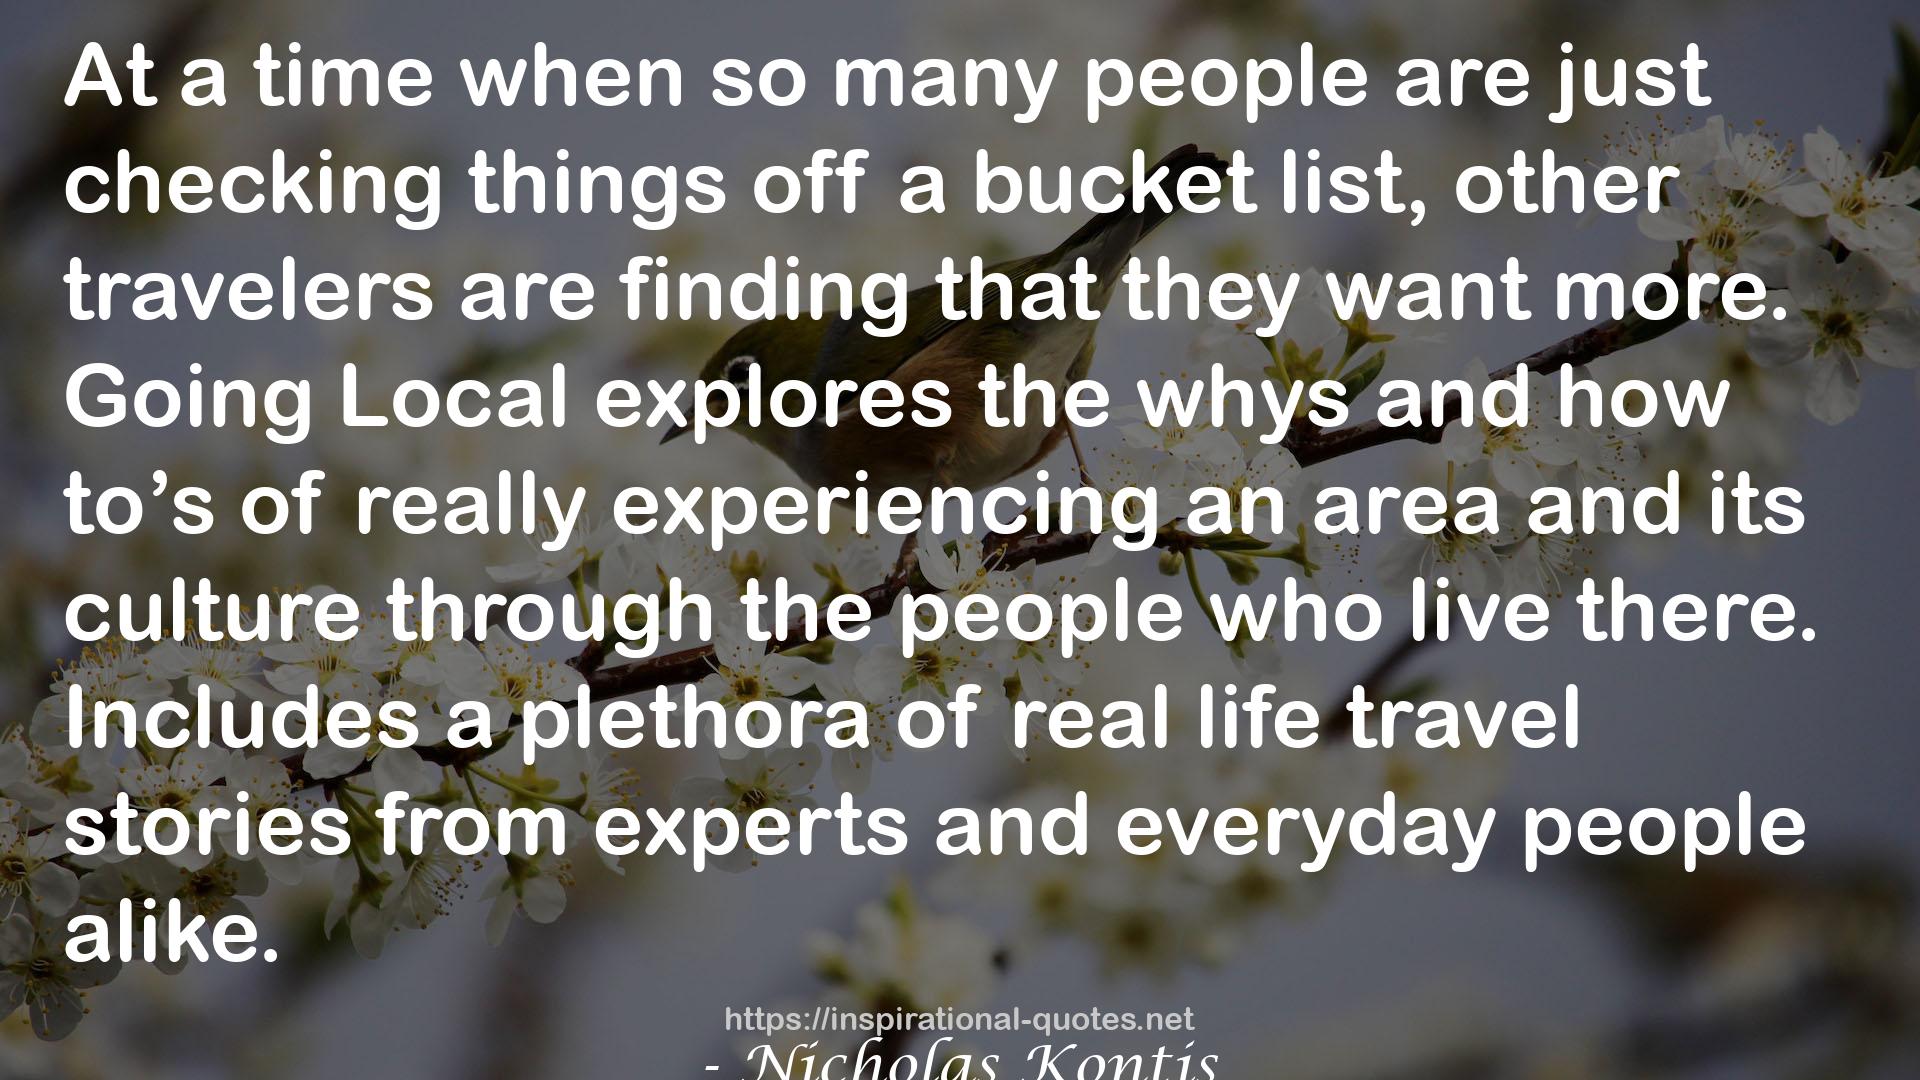 Going Local: Experiences and Encounters on the Road QUOTES